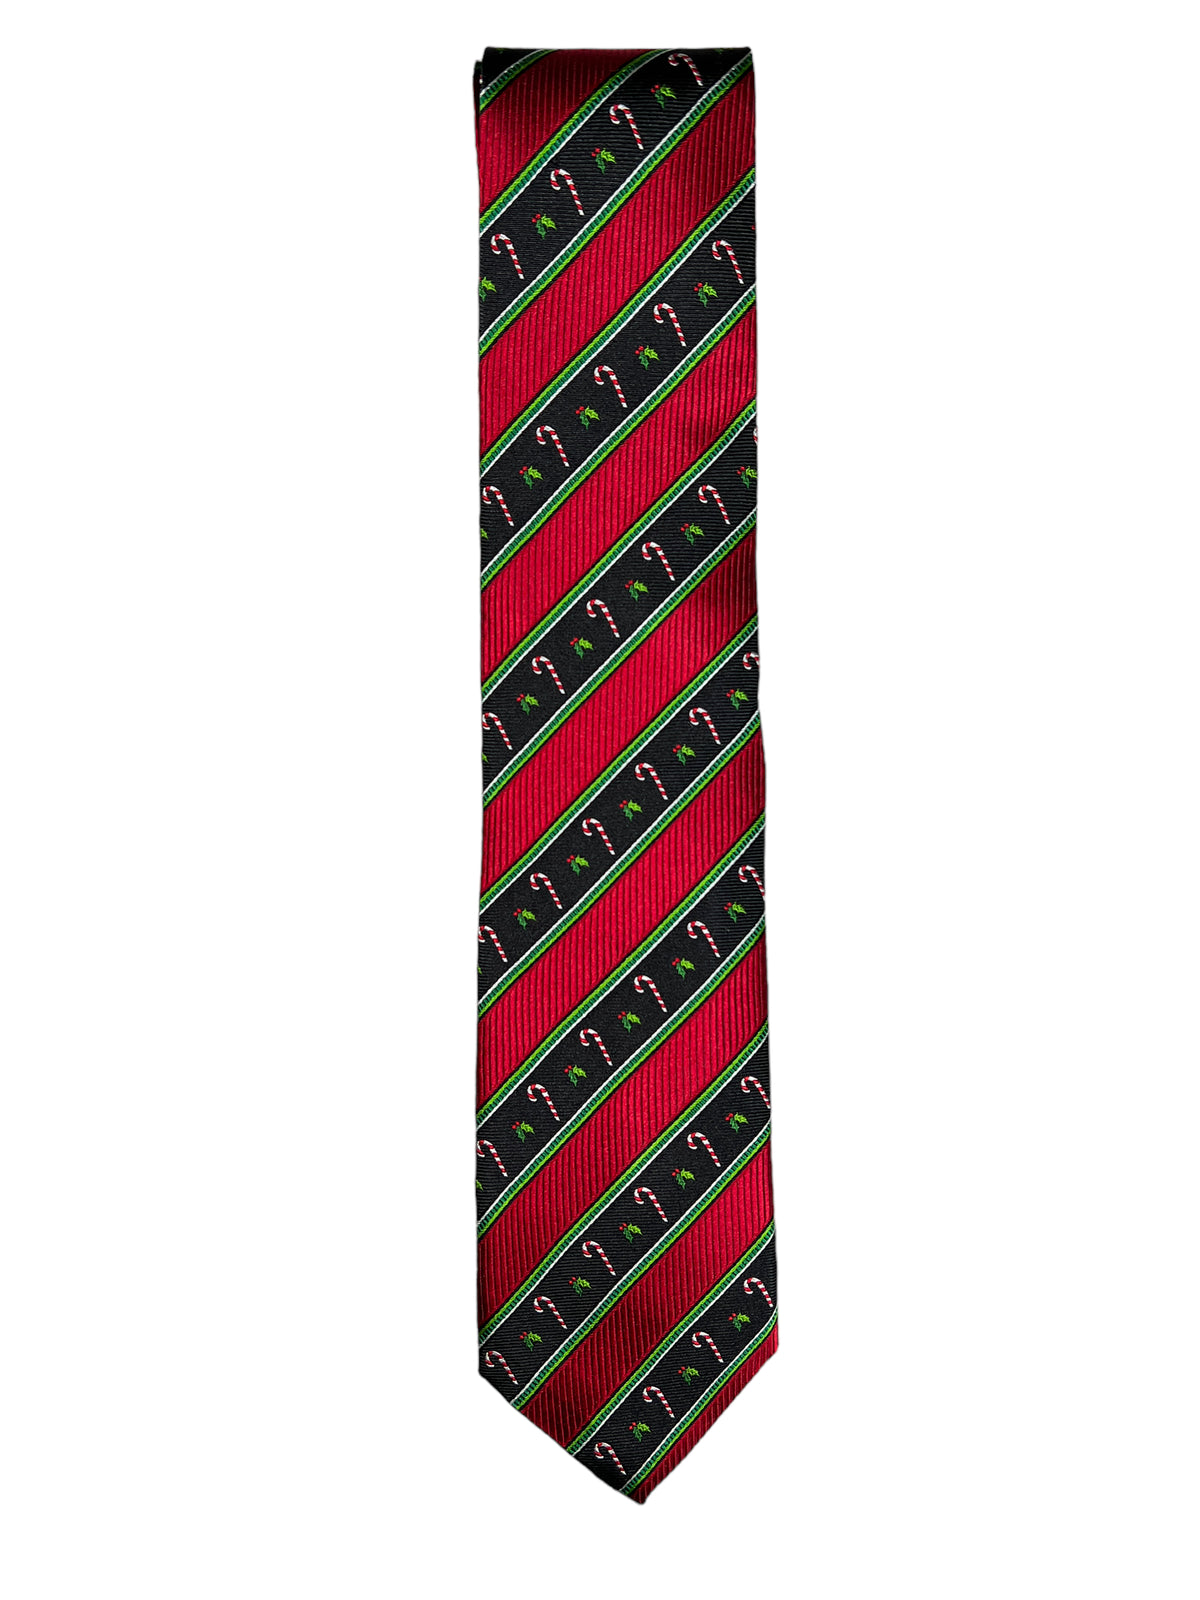 JZ RICHARDS CHRISTMAS TIE - RED & BLACK WITH CANDY CANES